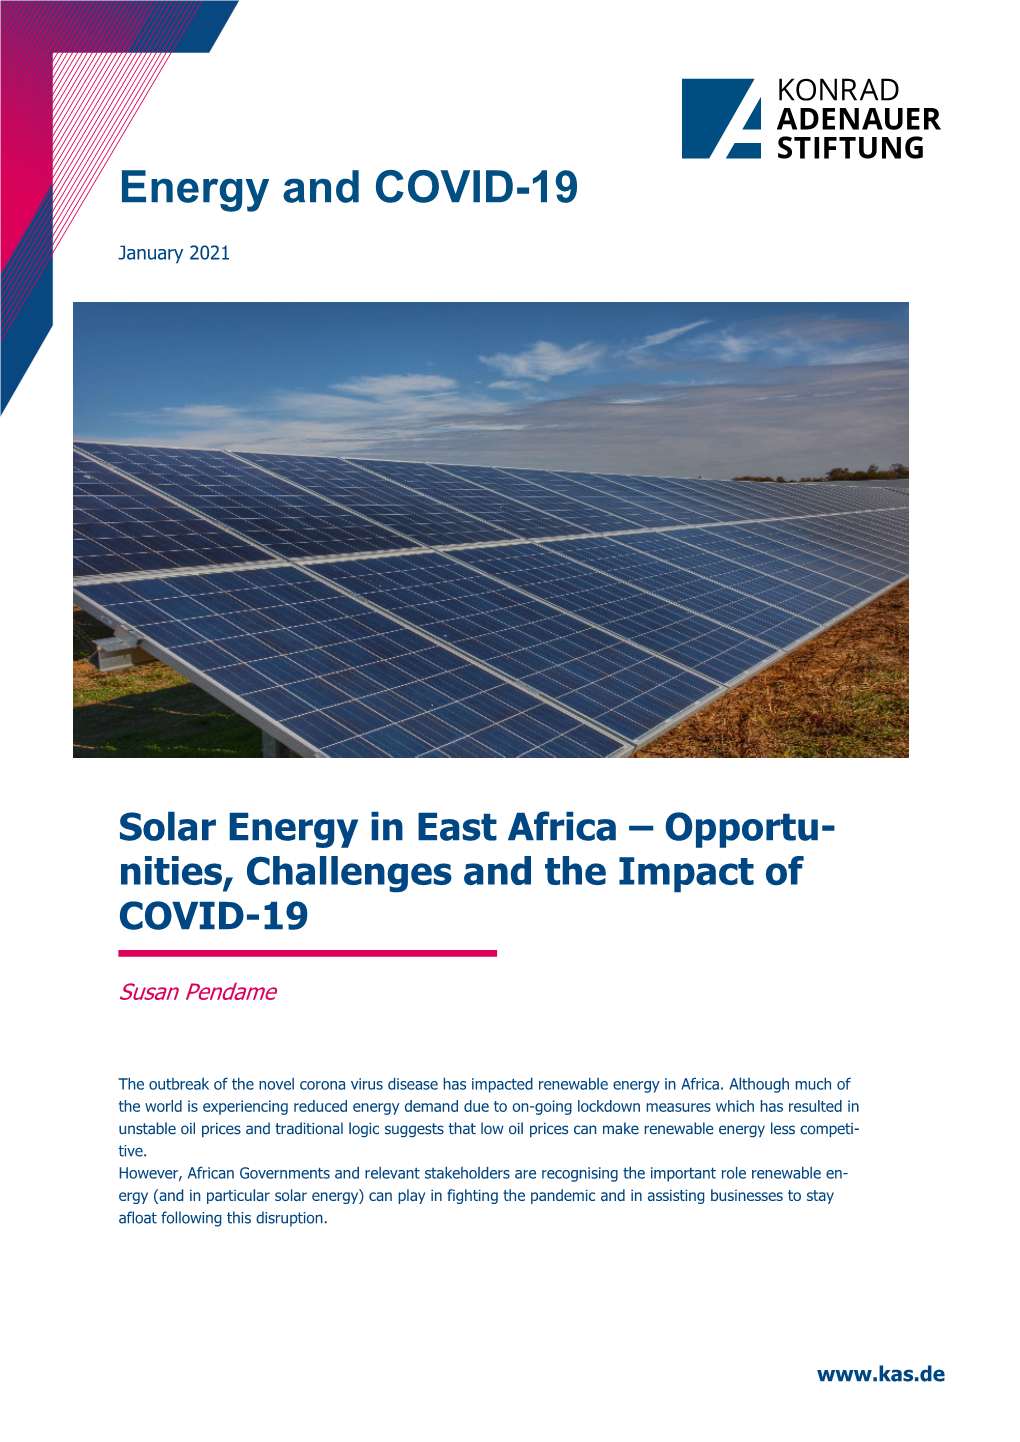 Solar Energy in East Africa – Opportu- Nities, Challenges and the Impact of COVID-19